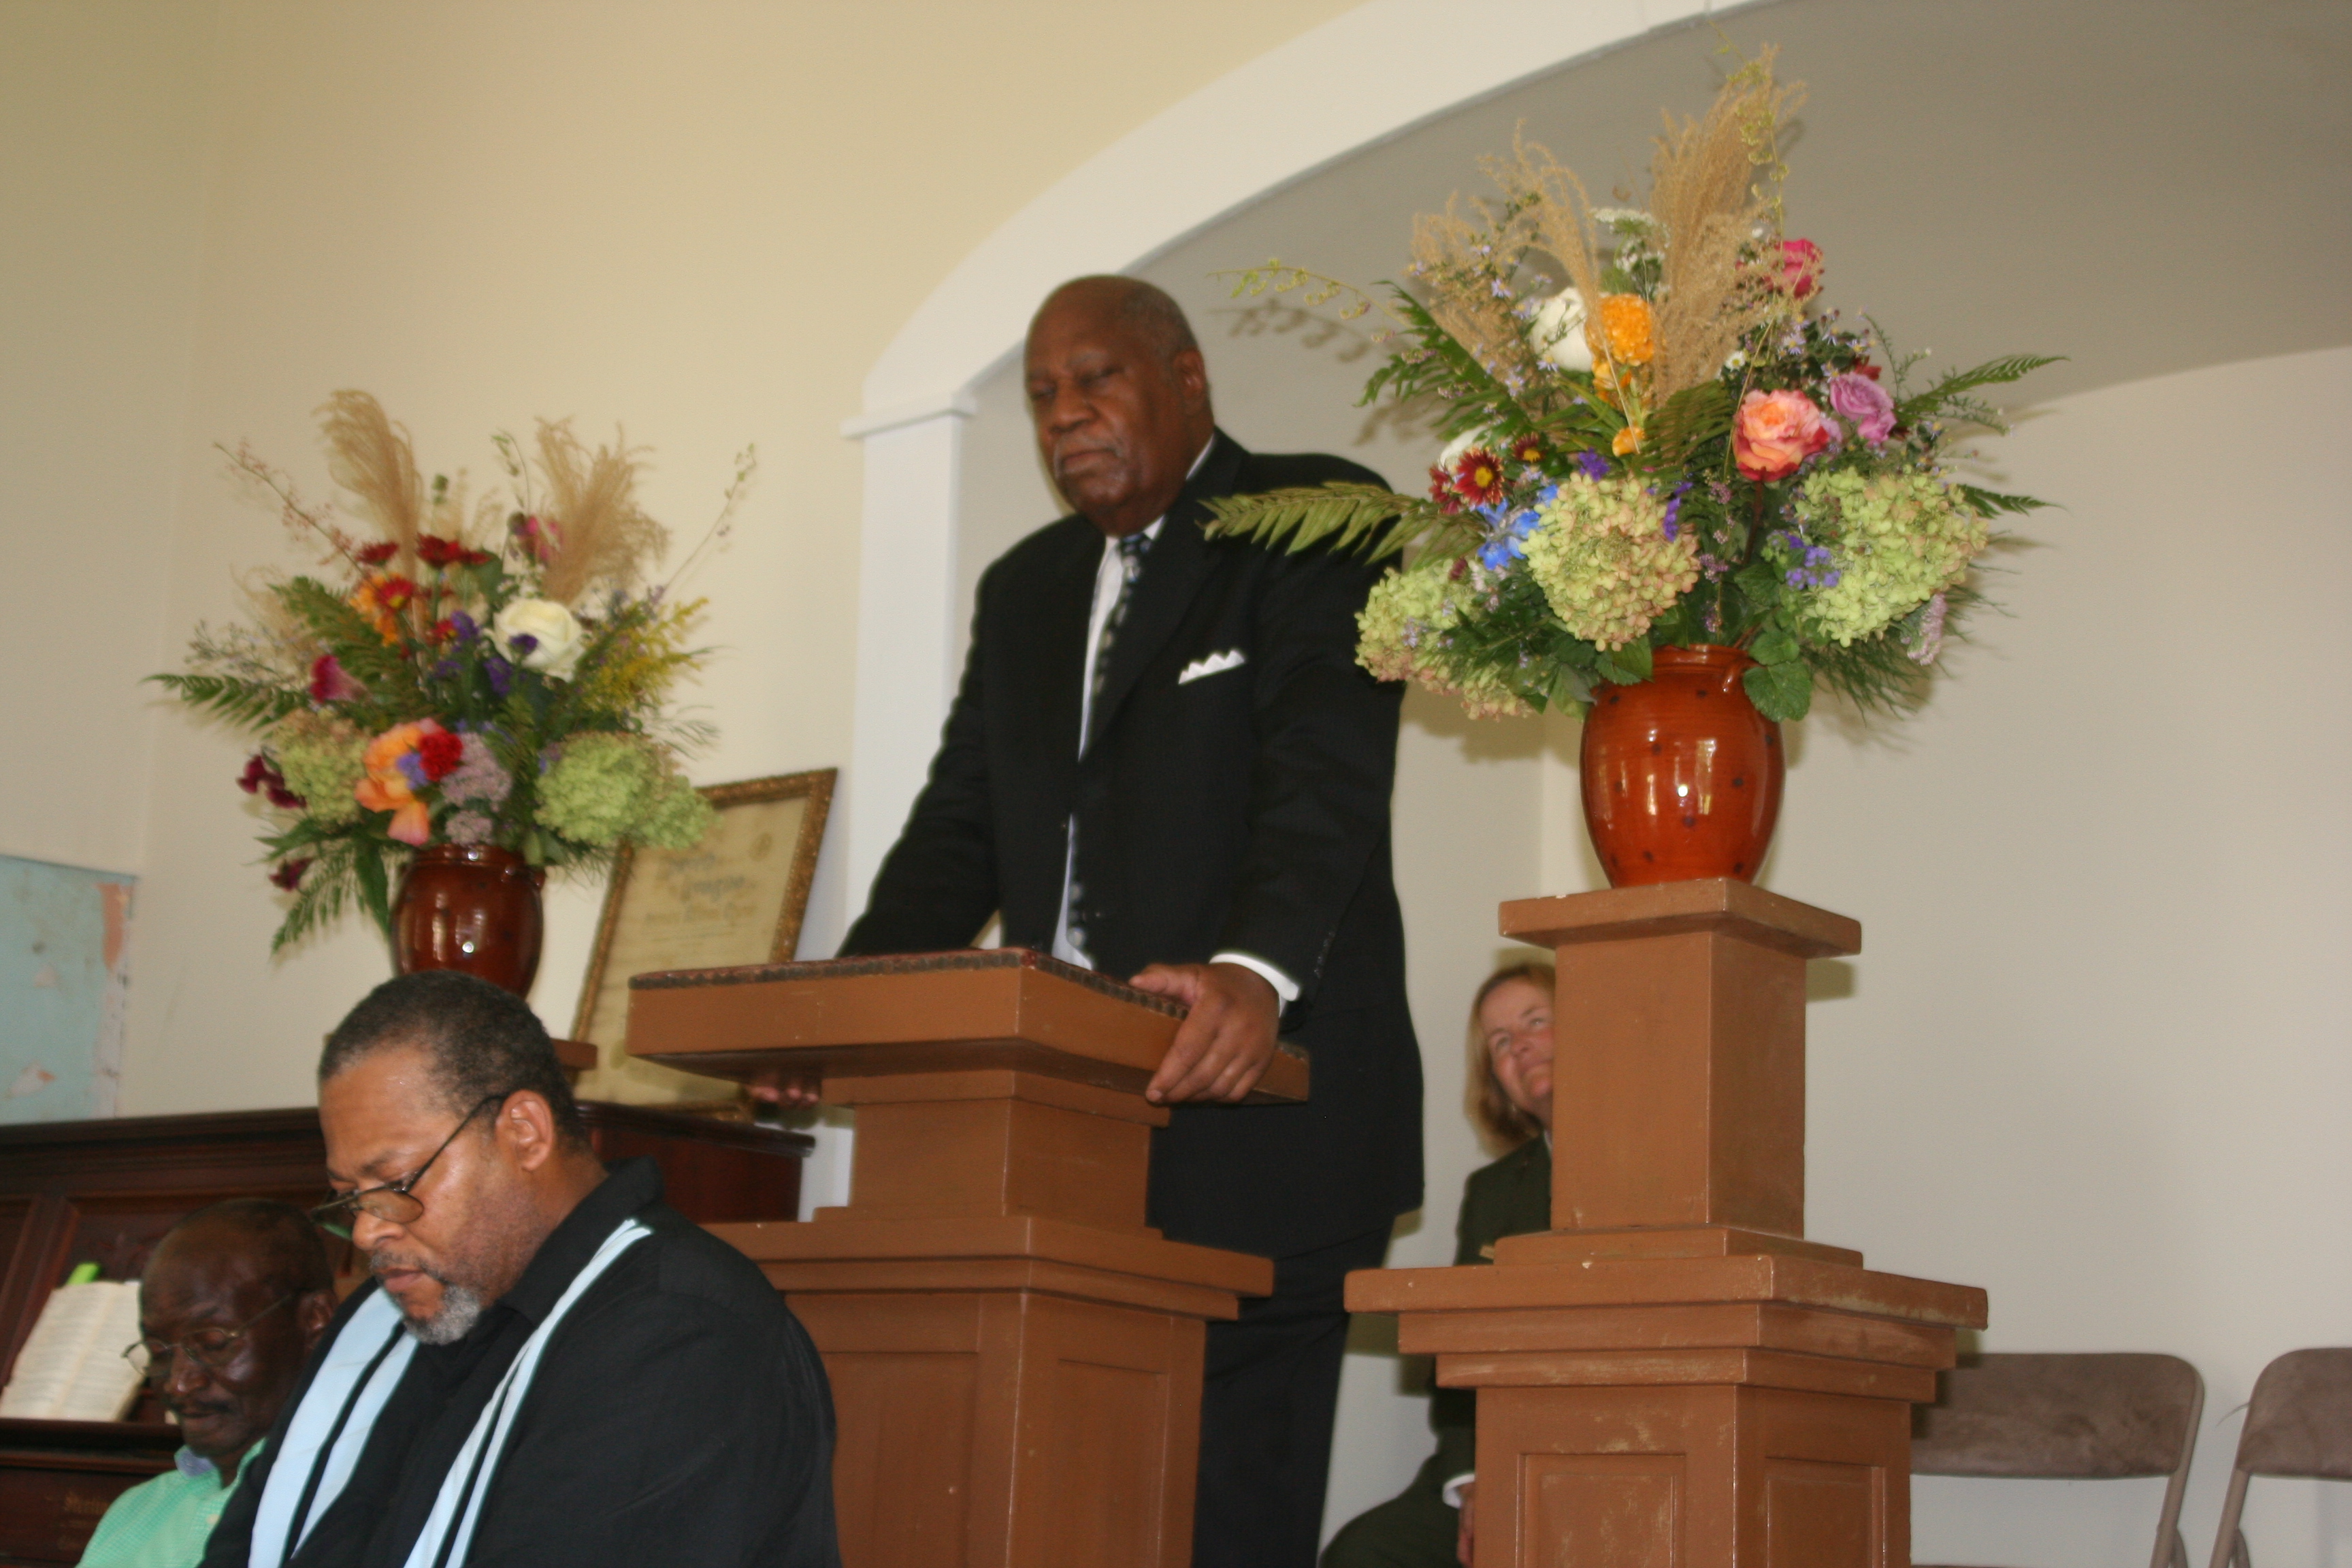 A speaker stands at the podium in the chapel.